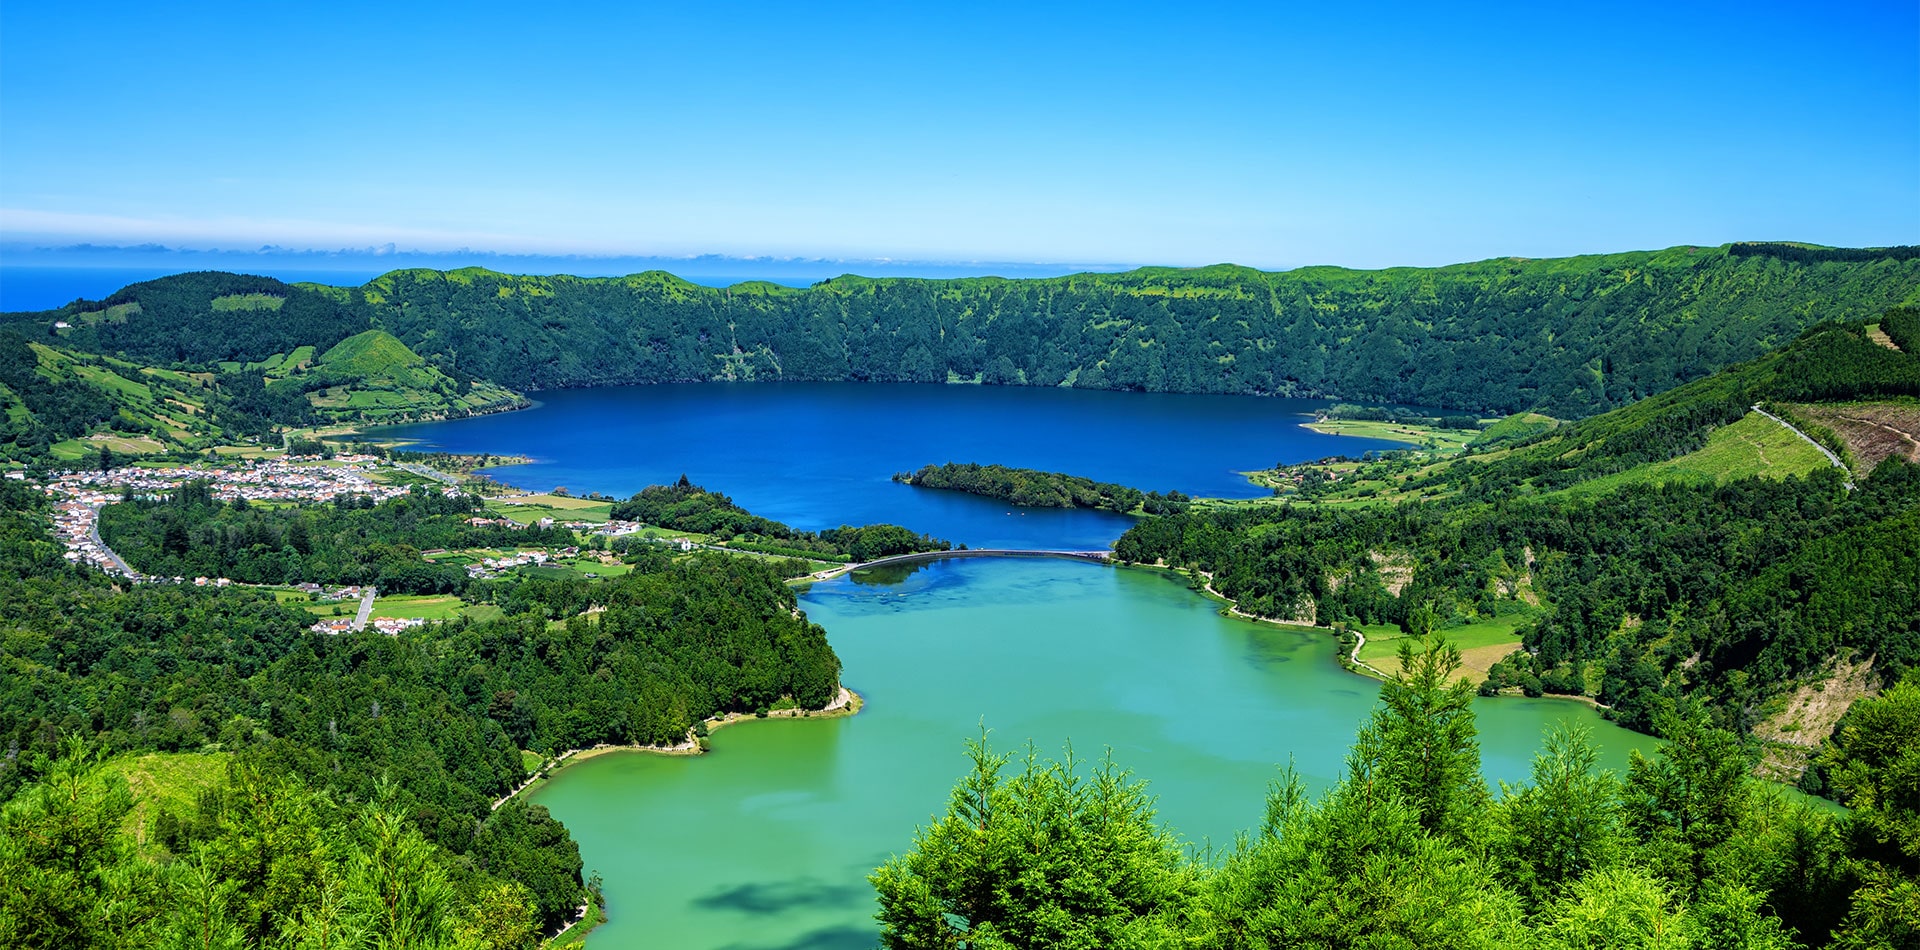 View over the crater lake at Sete cidades, Azores 